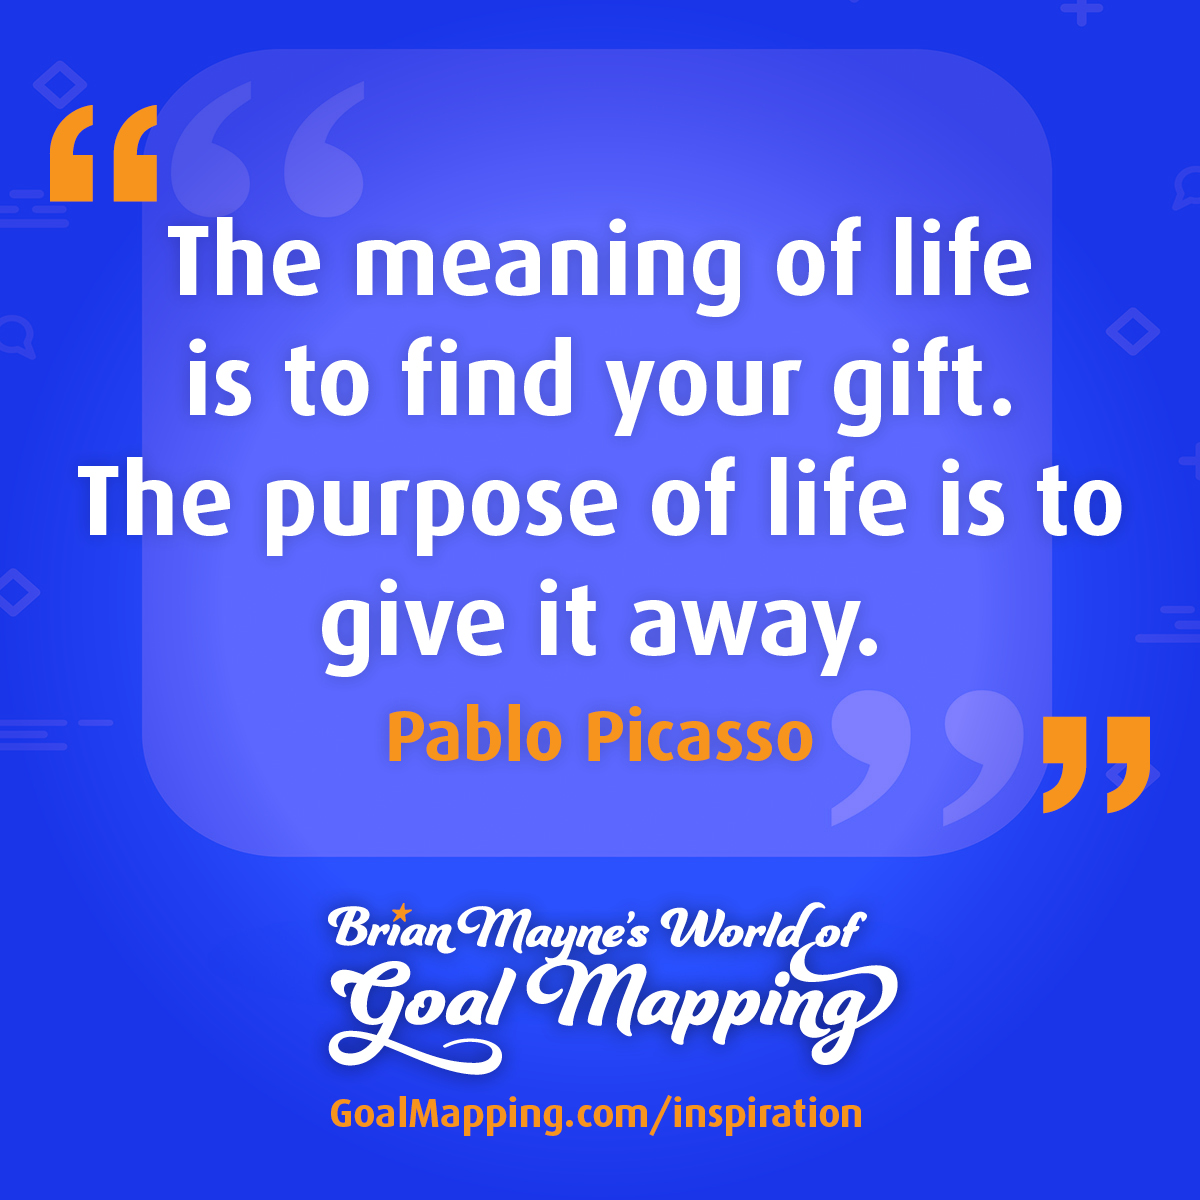 "The meaning of life is to find your gift. The purpose of life is to give it away." Pablo Picasso